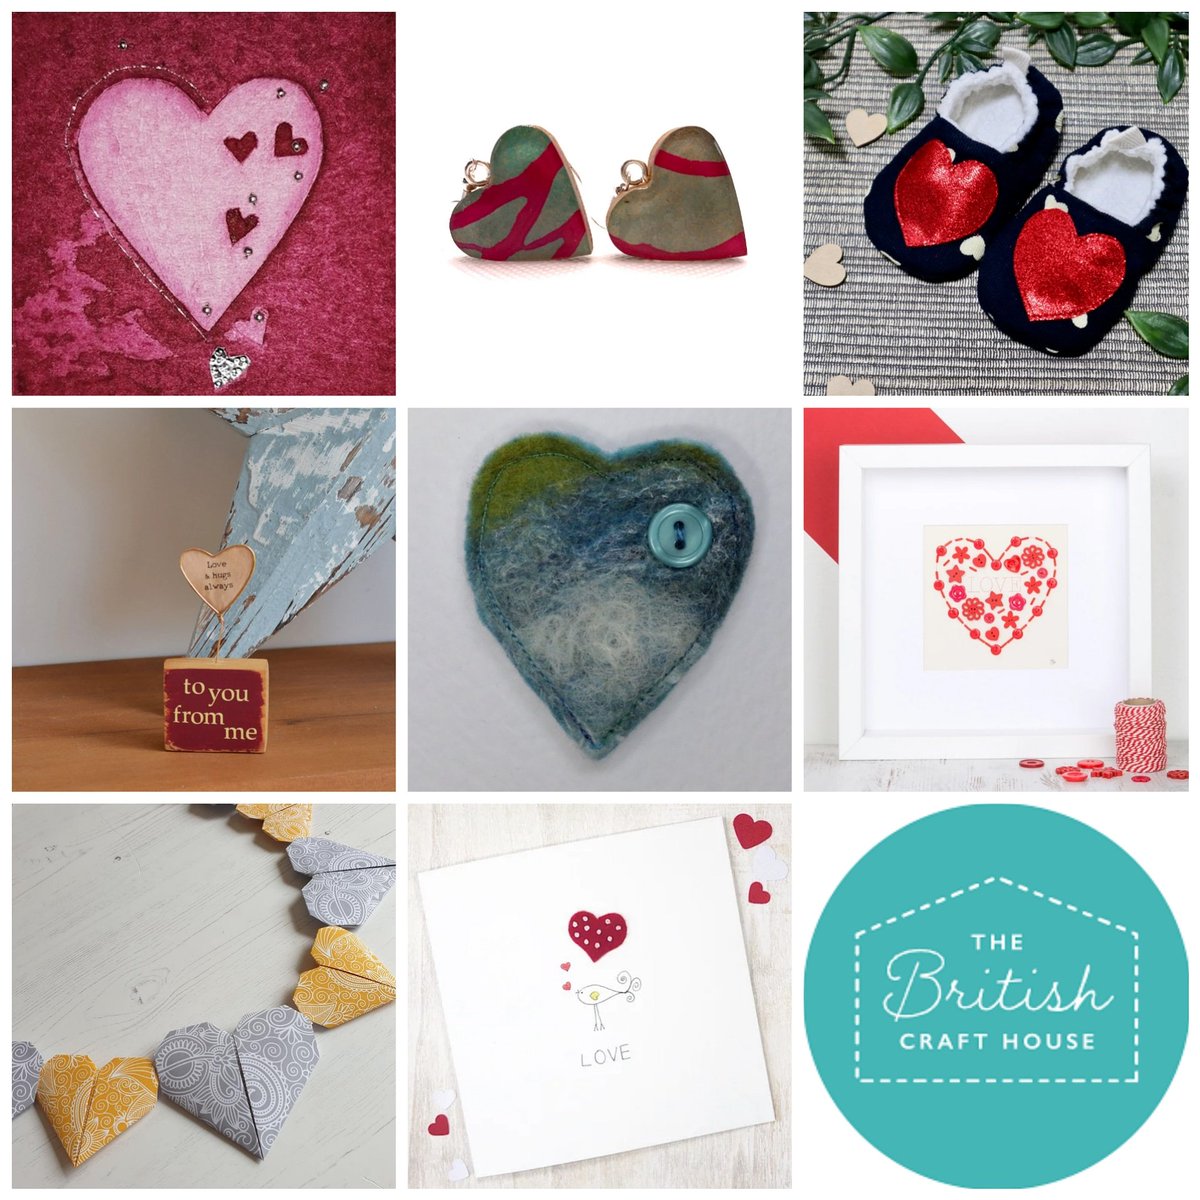 Today it's all about 'HEARTS' for #teamworkthursday over @BritishCrafting with @CardsJuniper @HancoxTextile @RegLoulou @TJDesignsUK @bevart_designs @PaperFlowerSh0p @hedgehog_happy ❤️💜💙💚💛❤️ #tbch #hearts #valentine pic.twitter.com/QdjASEH1Vm